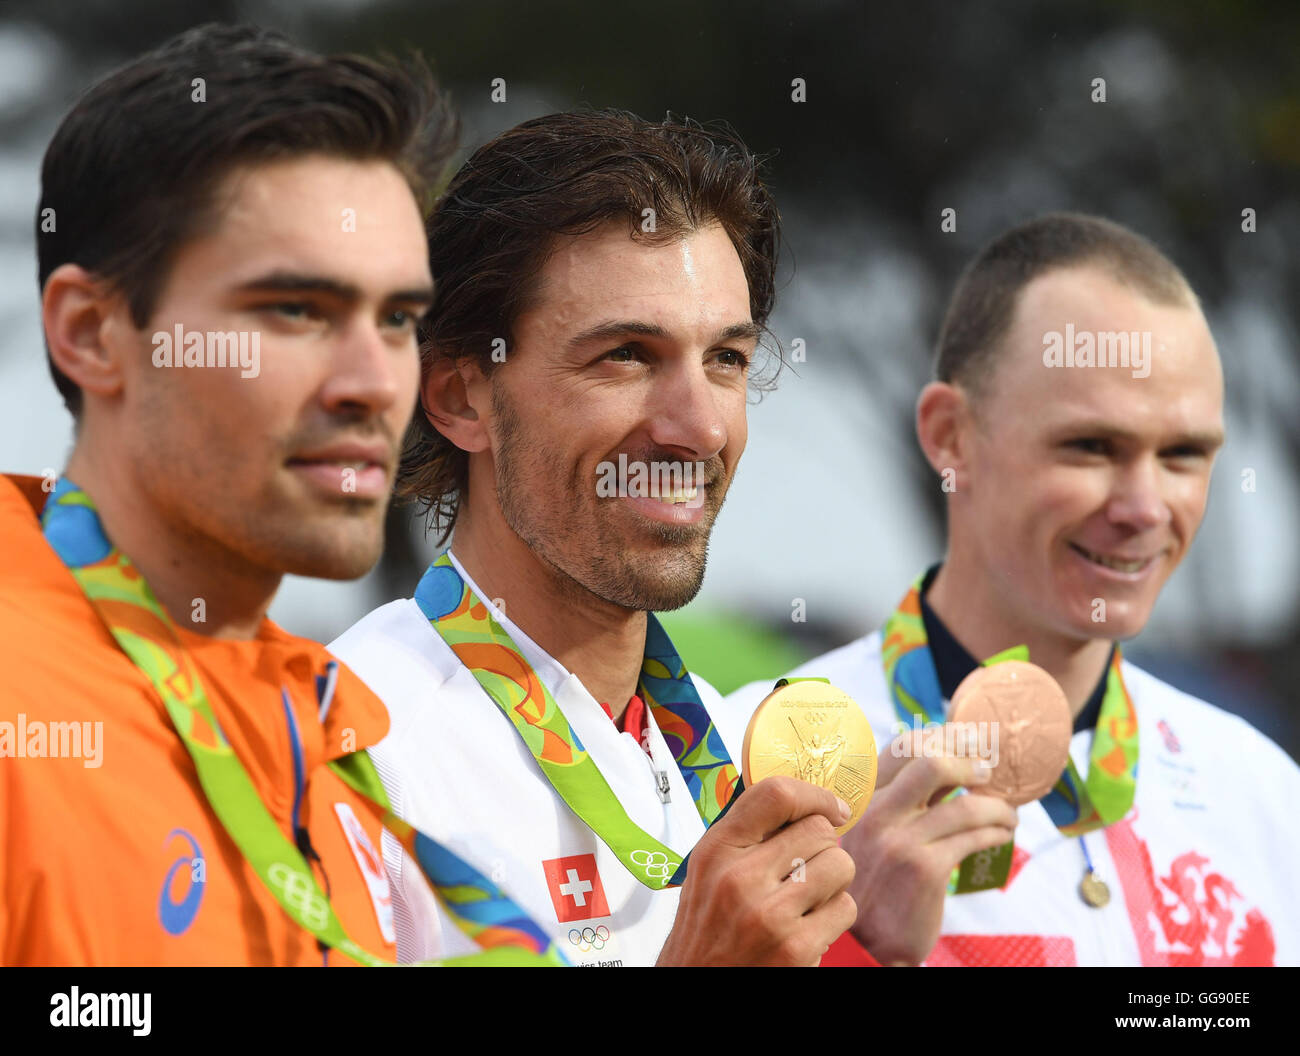 Rio de Janeiro, Brazil. 10th Aug, 2016. Fabian Cancellara of Switzerland celebrates on the podium with the gold medal after winning the men's Individual Time Trial of the Rio 2016 Olympic Games Road Cycling events at Pontal in Rio de Janeiro, Brazil, 10 August 2016. At left second placed Tom Dumoulin of the Netherlands and at right Christopher Froome of Great Britain. Photo: Sebastian Kahnert/dpa/Alamy Live News Stock Photo